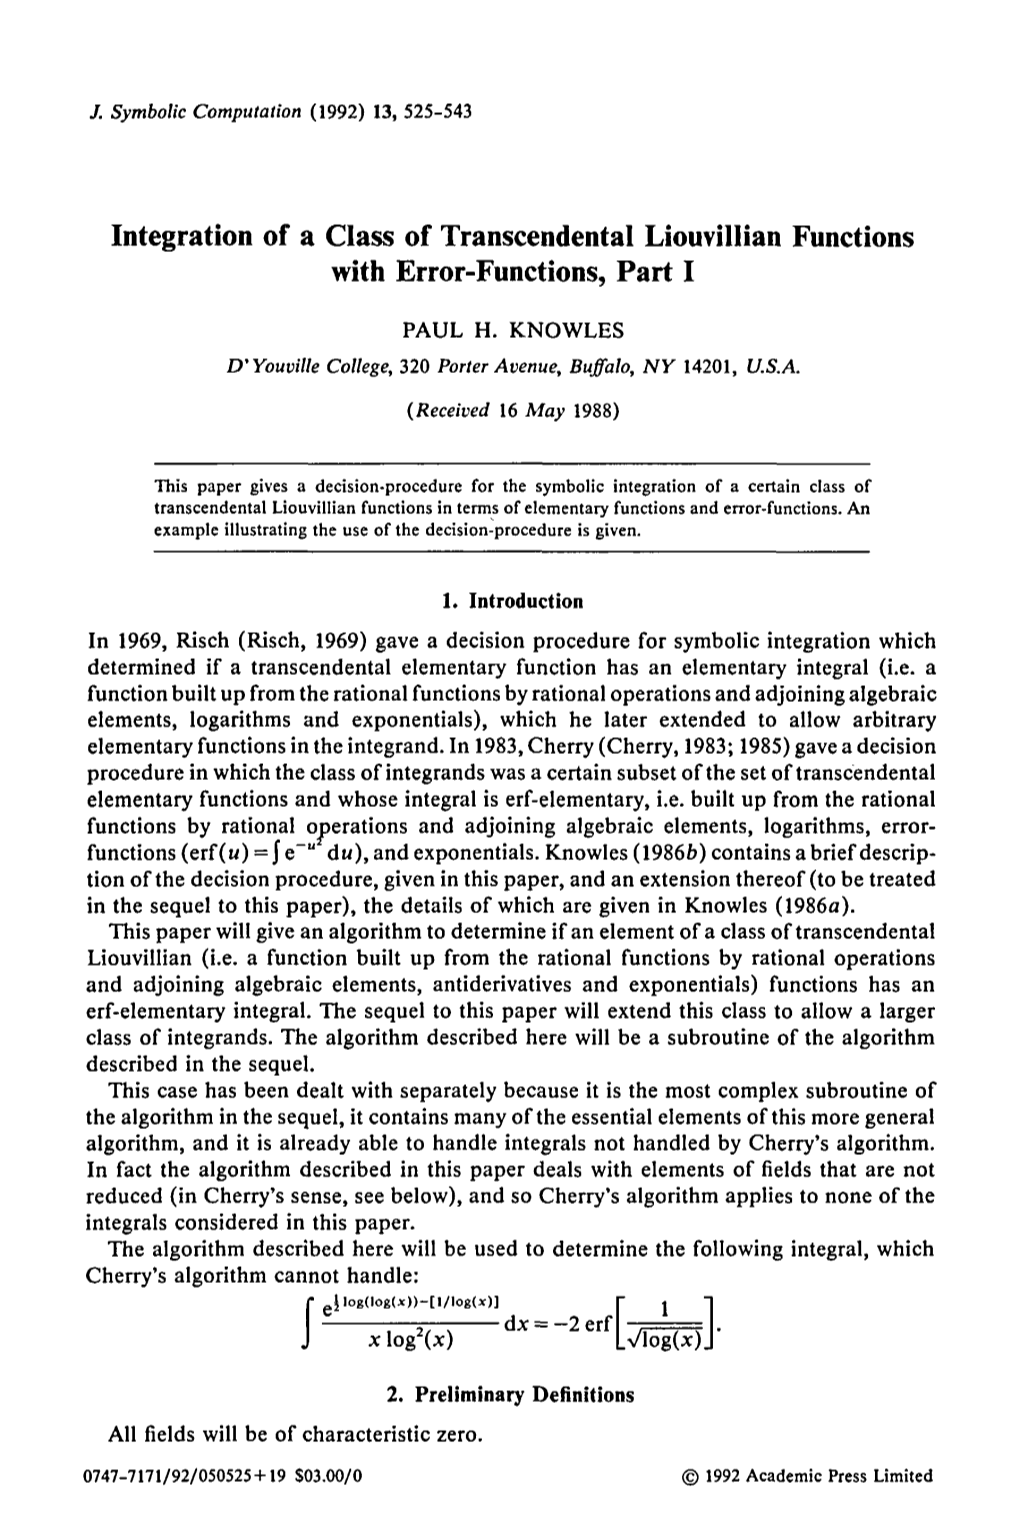 Integration of a Class of Transcendental Liouvillian Functions with Error-Functions, Part I